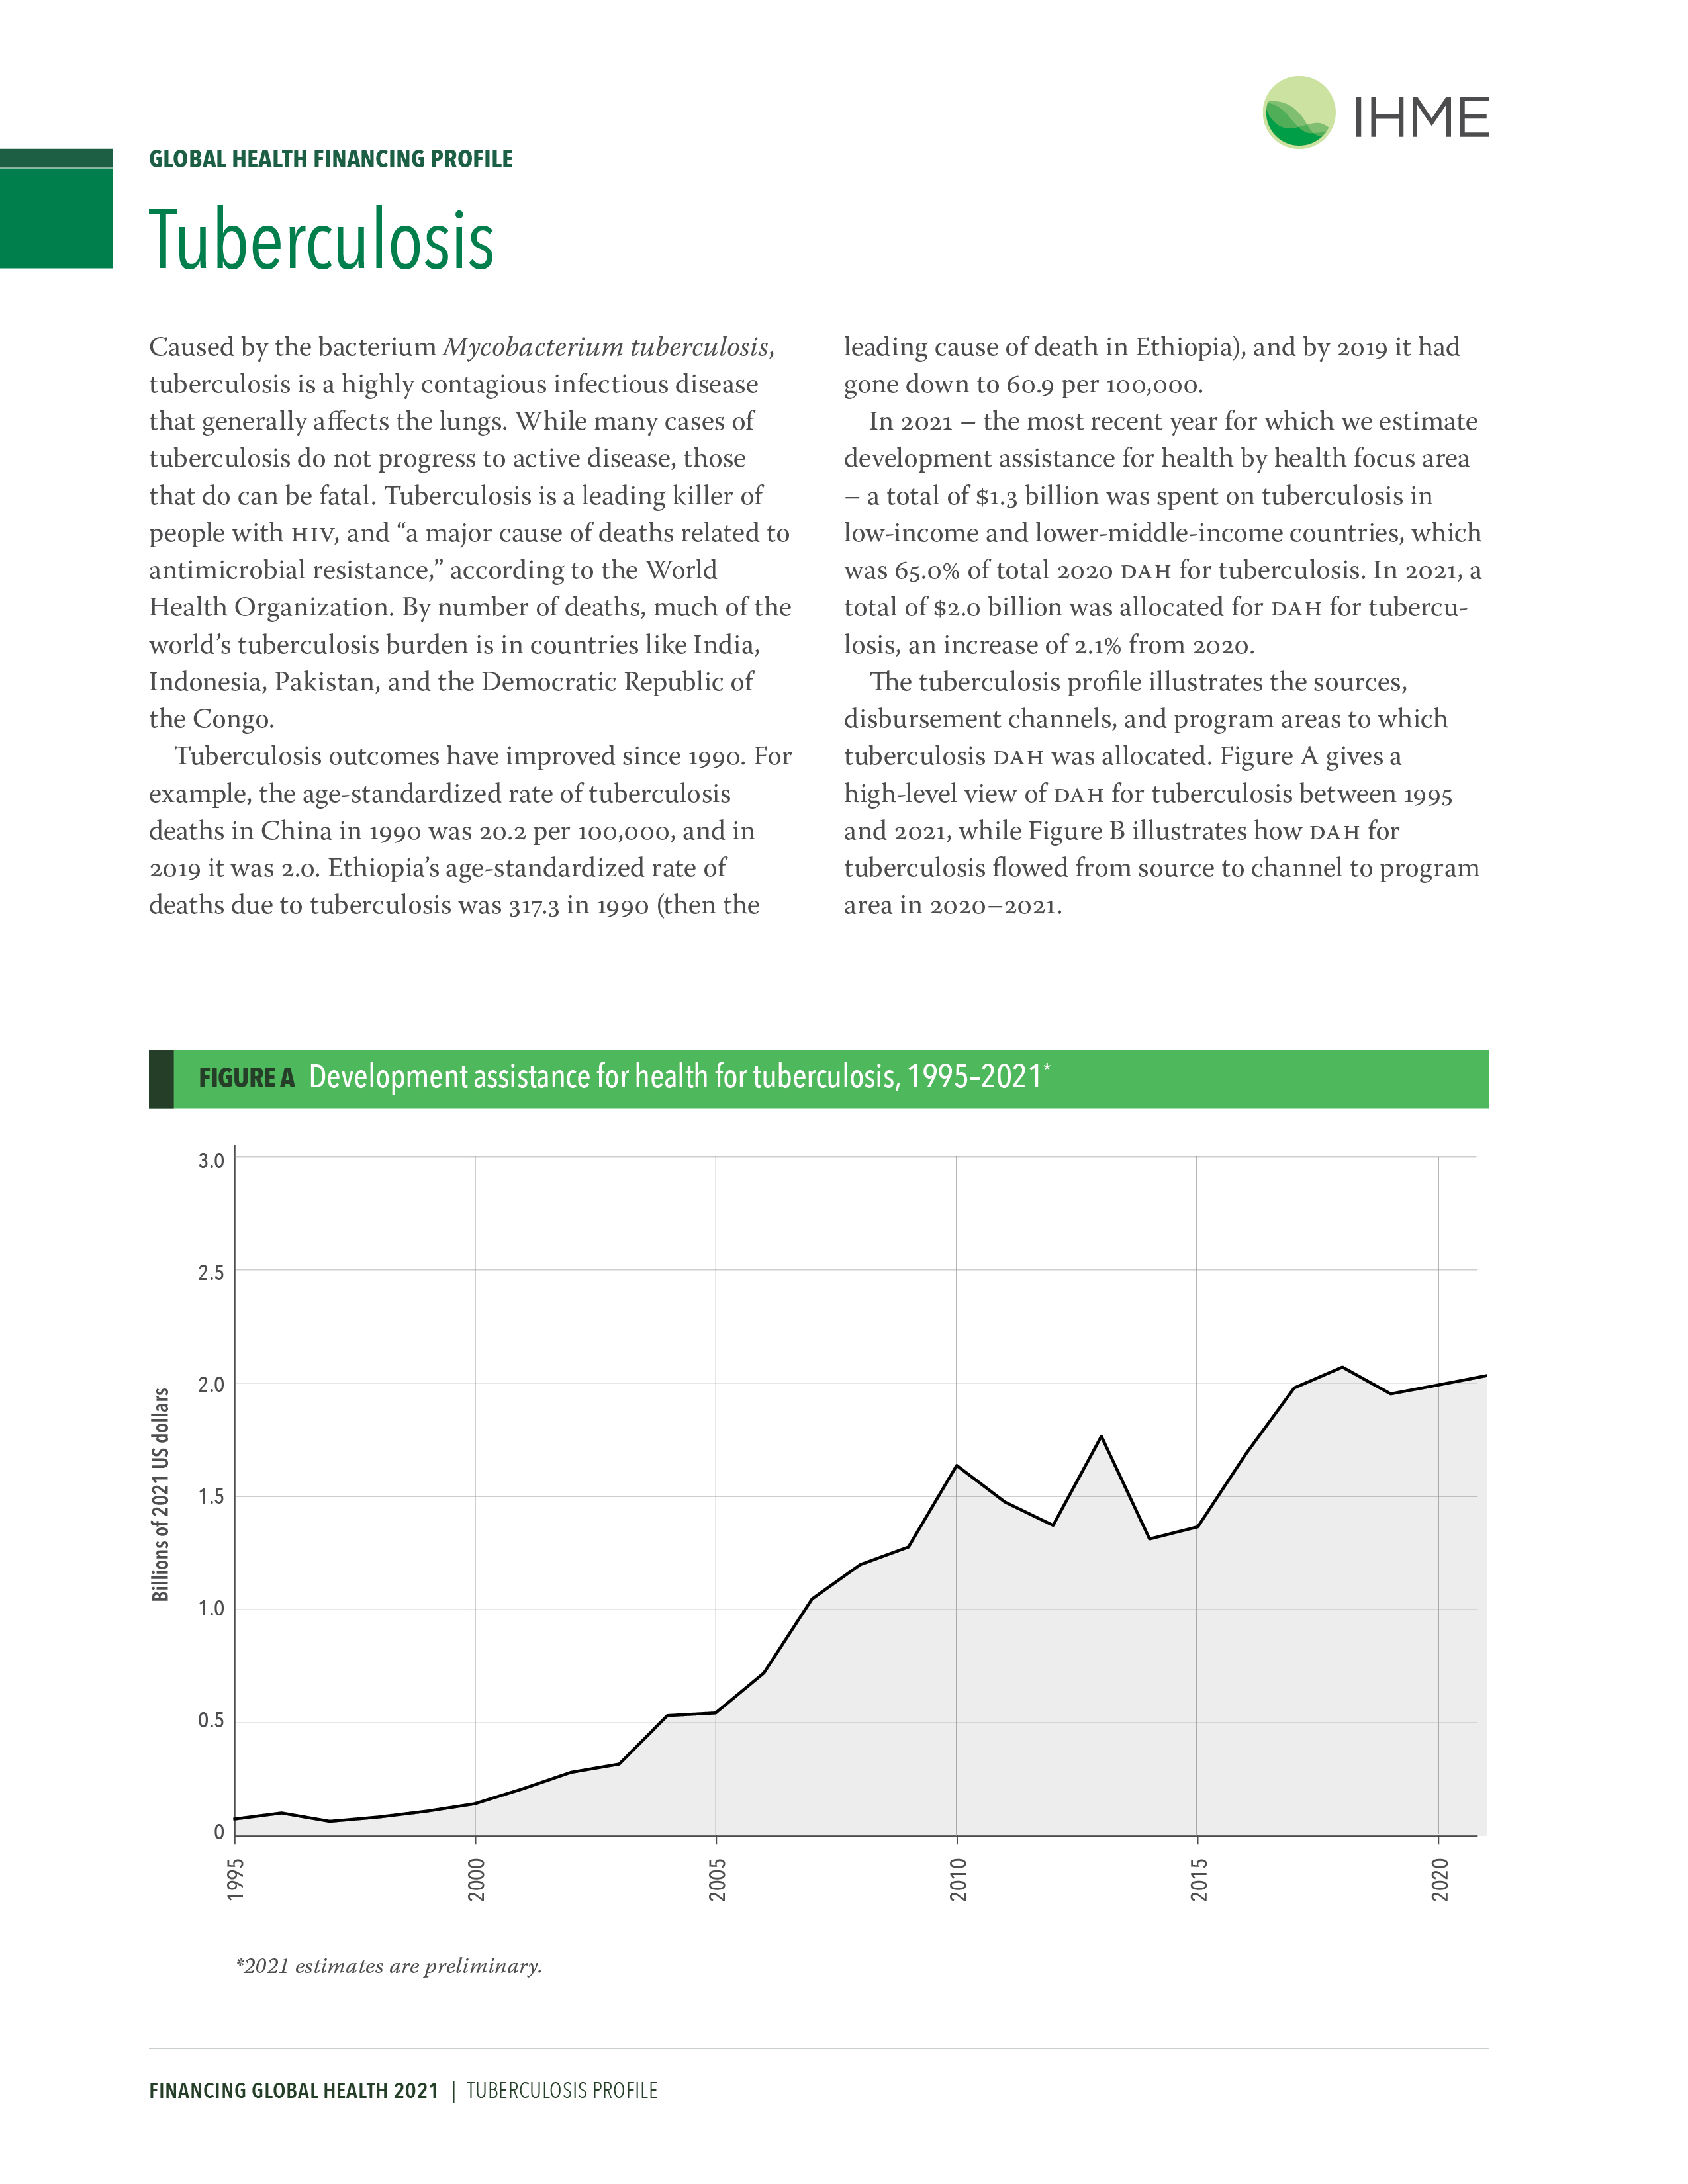 Disease spending profile for tuberculosis: page 1 provides an overview of the expenses of tuberculosis globally and development assistance for health. Download the profile for more details. 